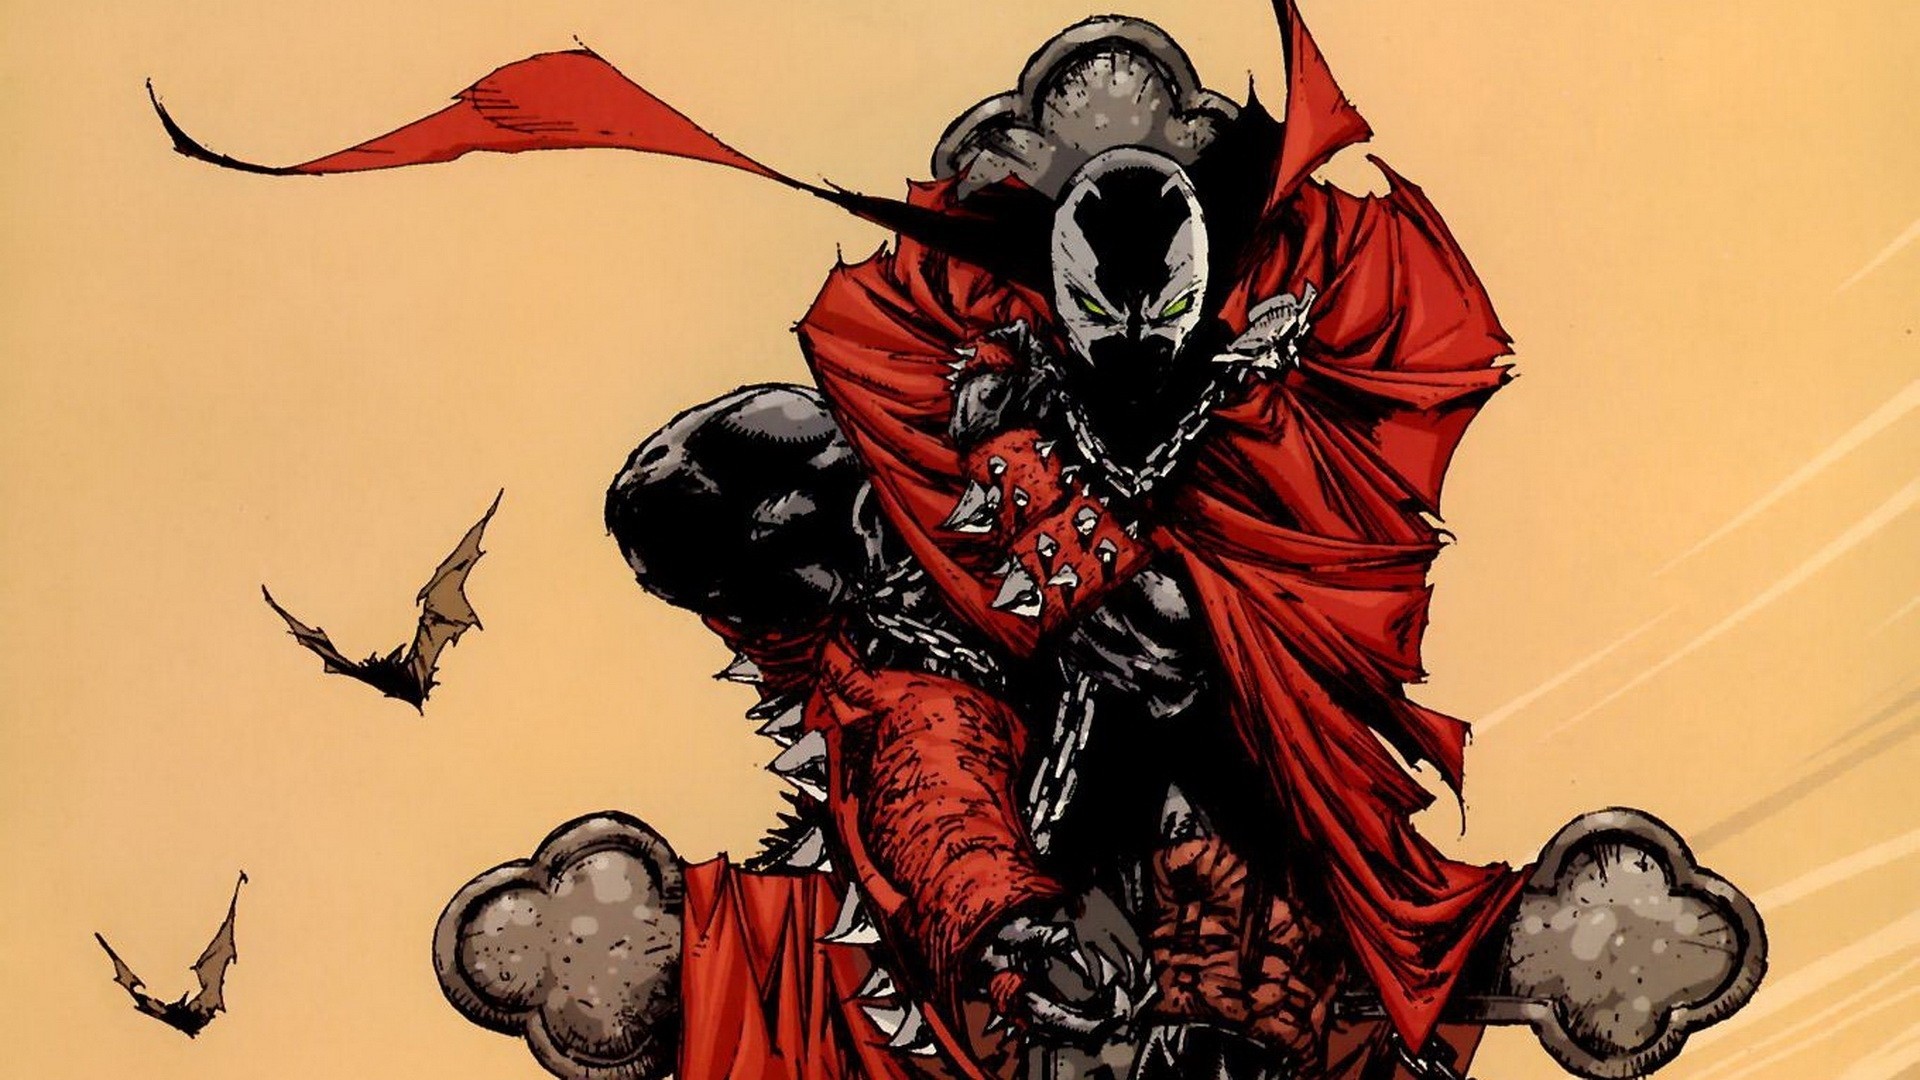 1920x1080 Rumours of Upcoming Spawn Film Come to Light